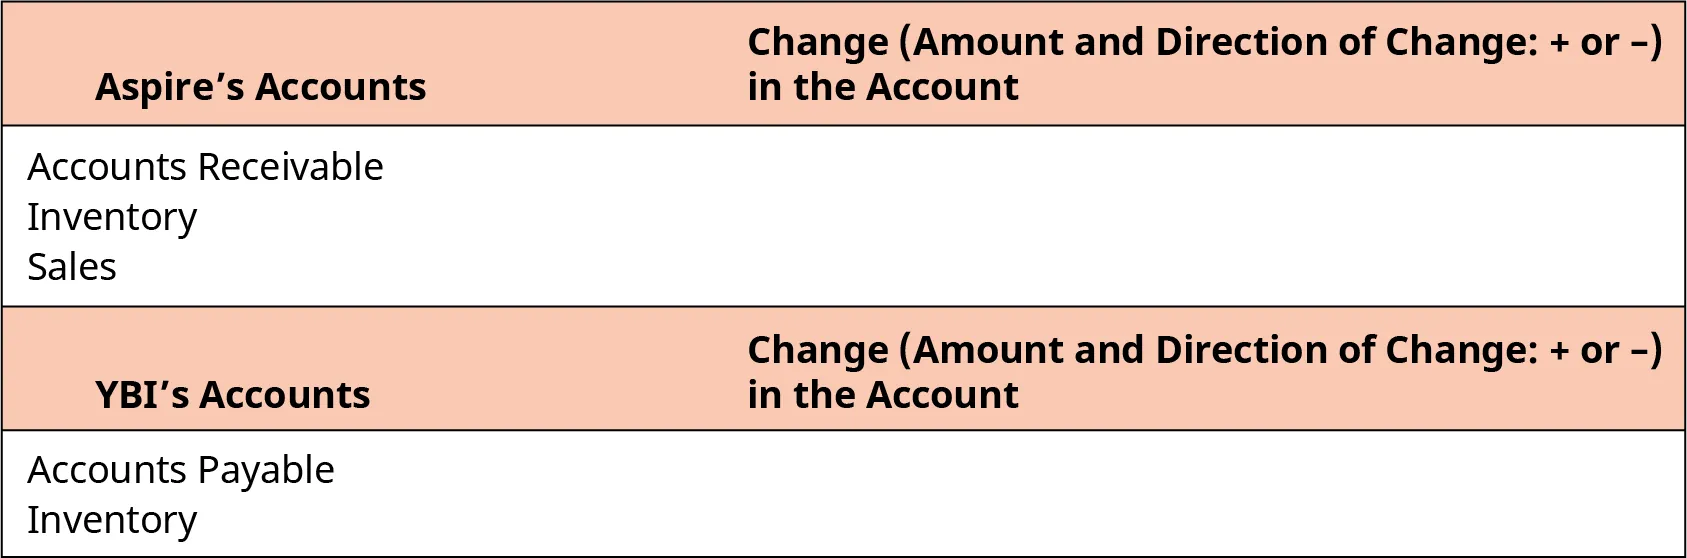 A table shows the line items accounts receivable, inventory, and sales for Aspire’s accounts.  A space is provided to indicate the change (amount and direction of change: positive or negative) in the account. The line items accounts payable and inventory are shown for YBI’s accounts. A space is provided to indicate the change (amount and direction of change: positive or negative) in the account.